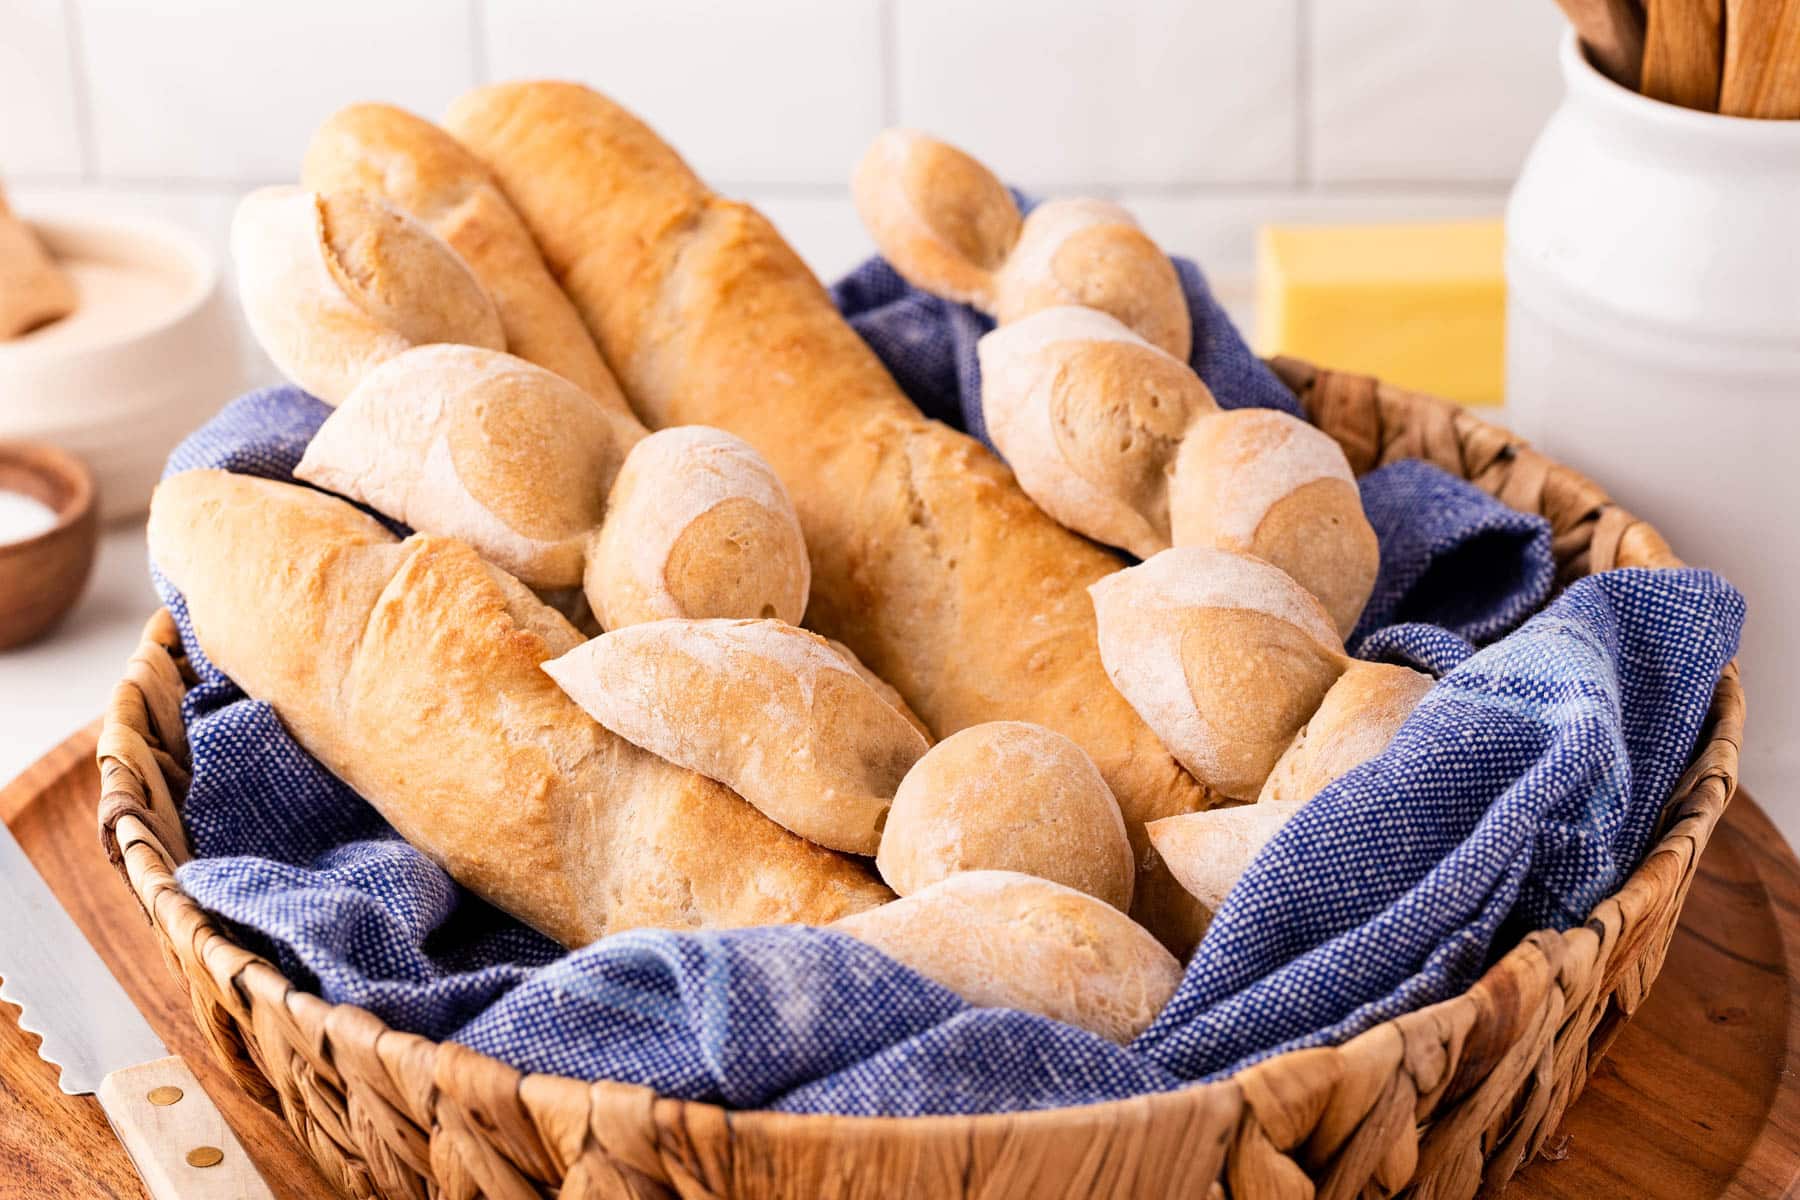 Horizontal photo of baguettes and epi loaves in a basket with a blue tea towel. 